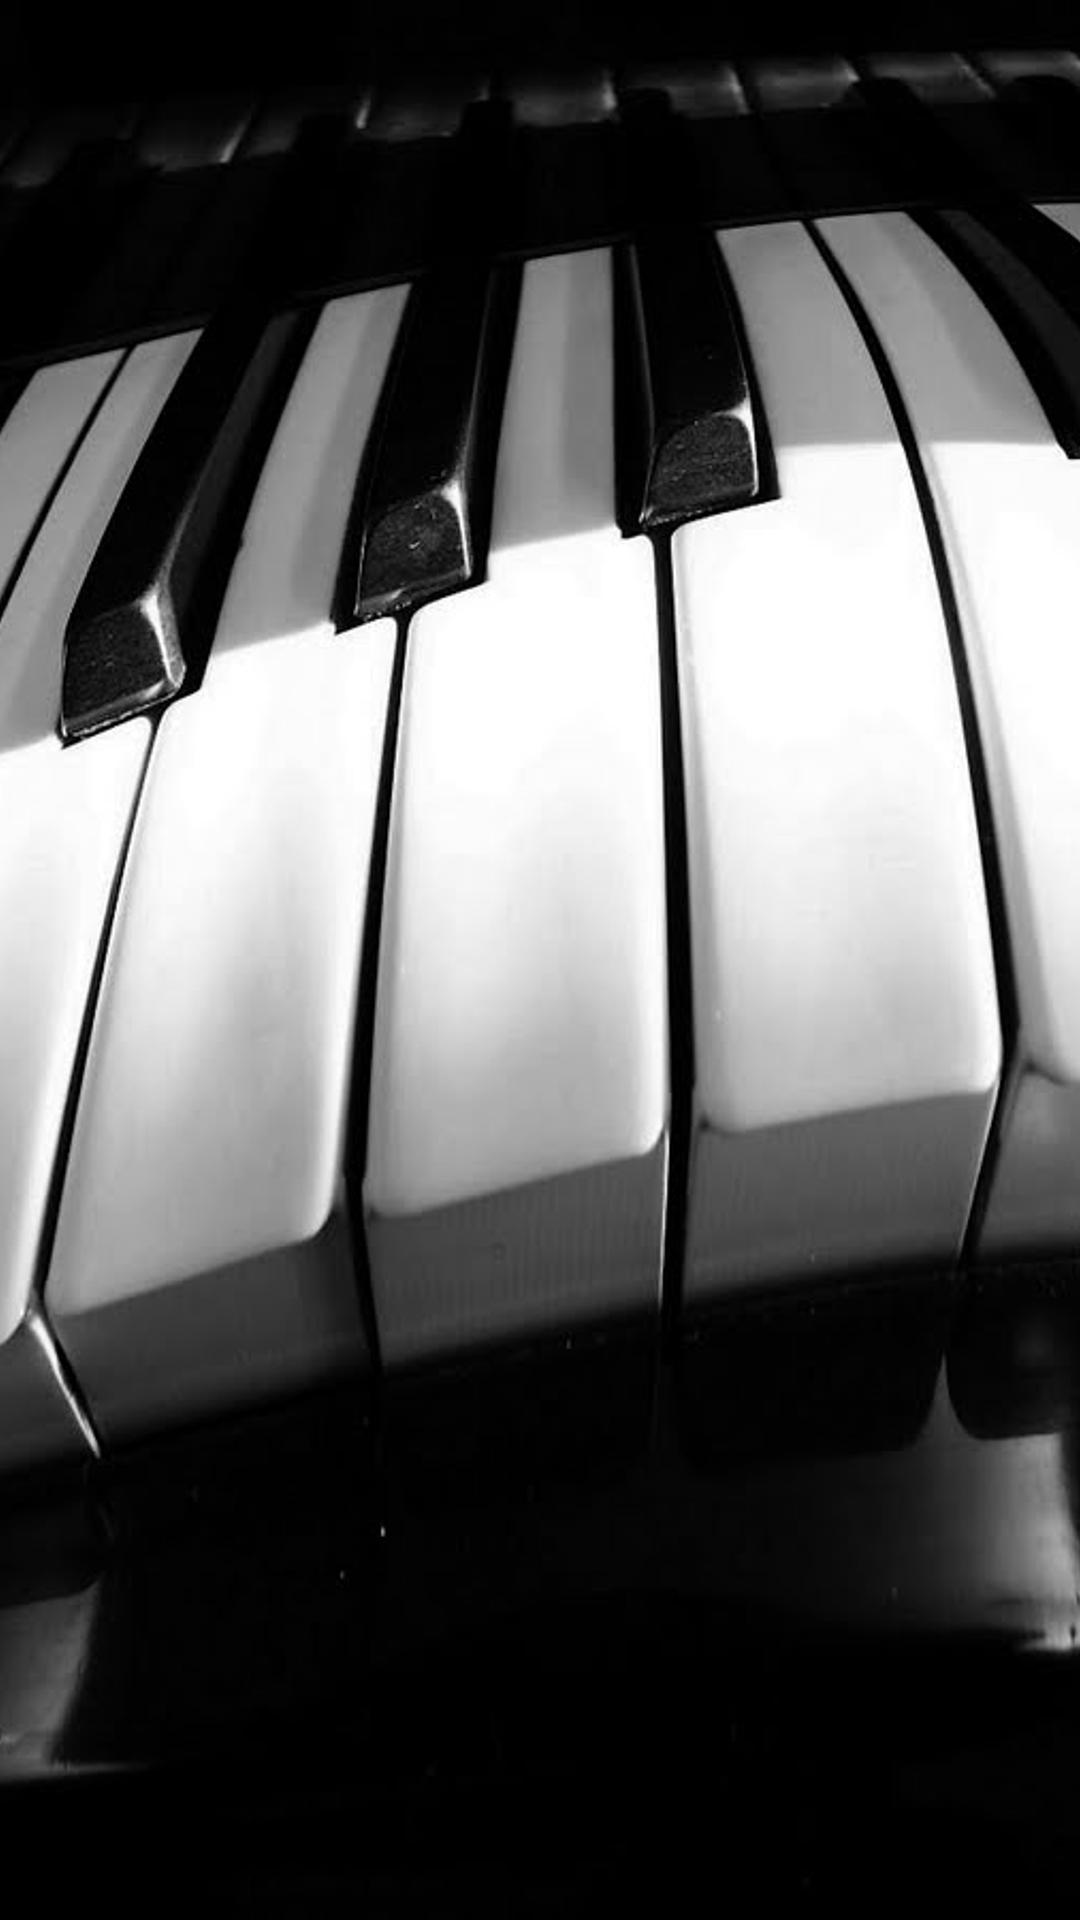 A curved piano - White and black HD wallpaper